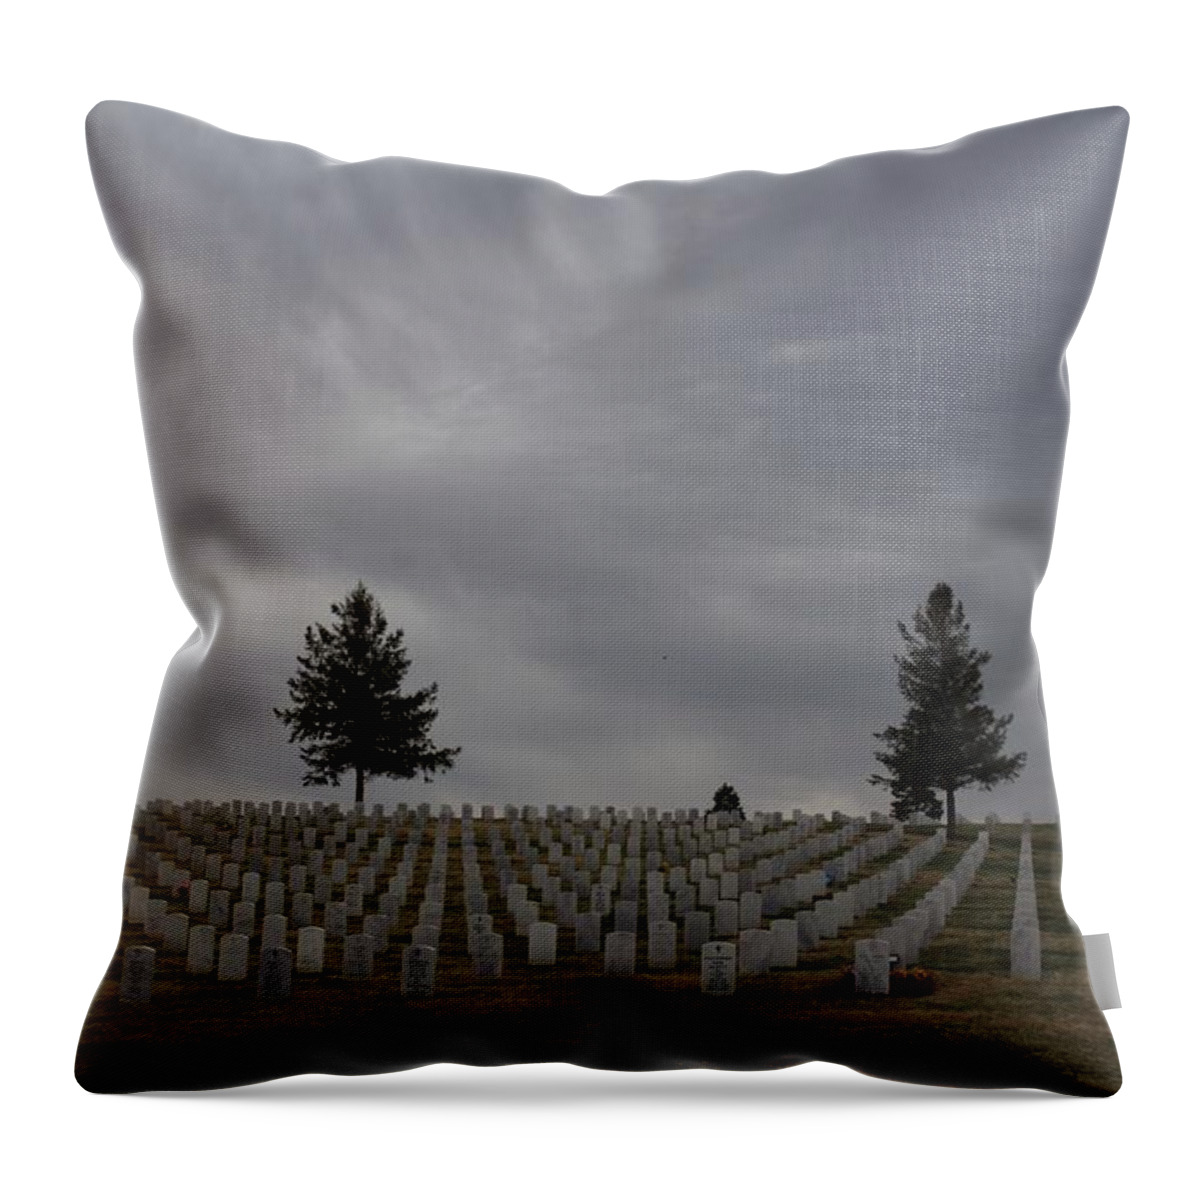 Black Hills Throw Pillow featuring the photograph Black Hills Cemetery by Suzanne Lorenz